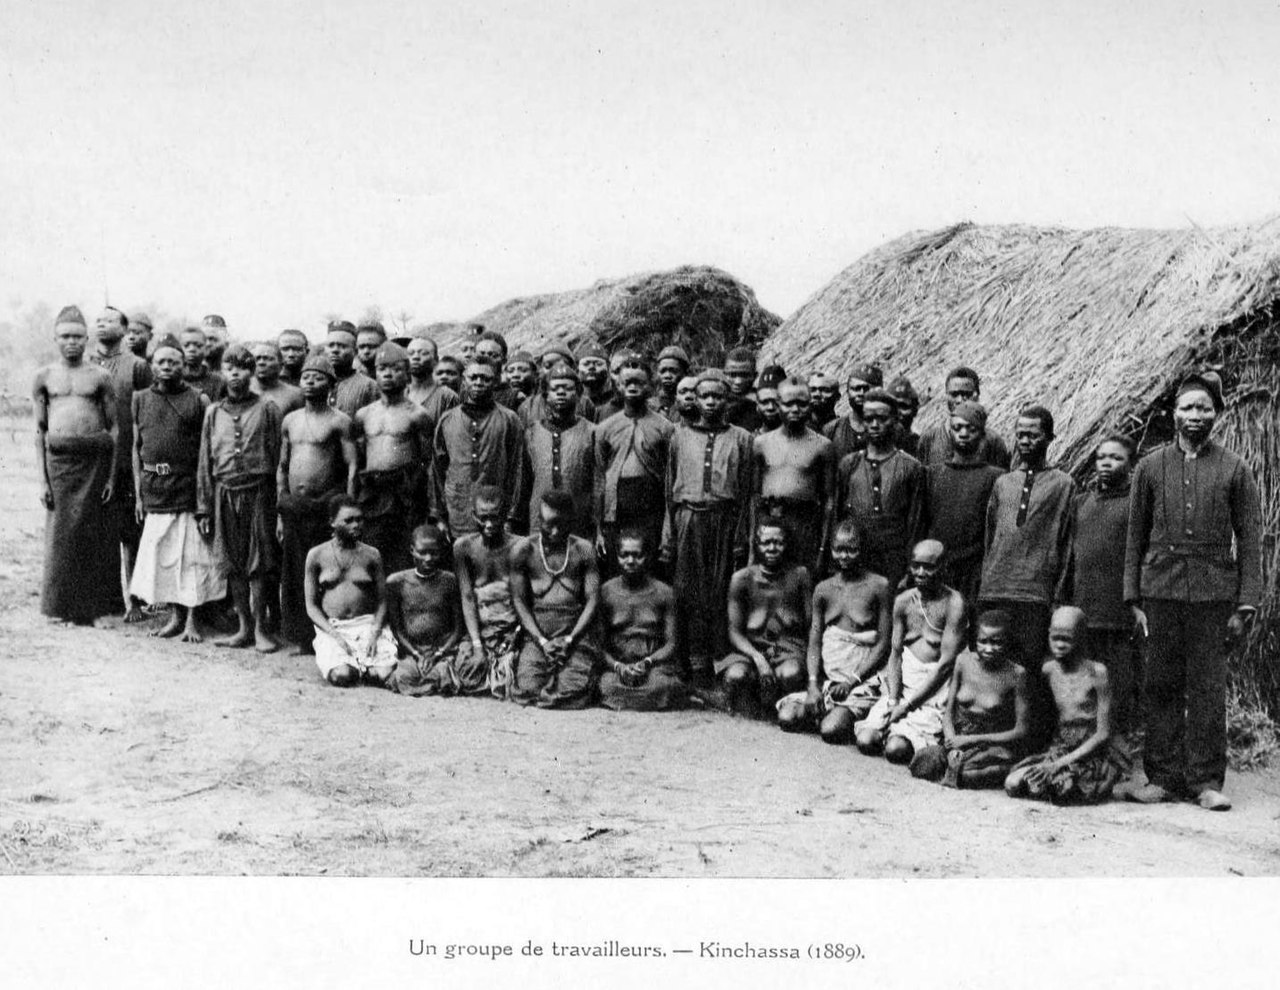 A group of forced laborers in Kinshasa, now the capital of the Democratic Republic of Congo, during Belgian colonization.